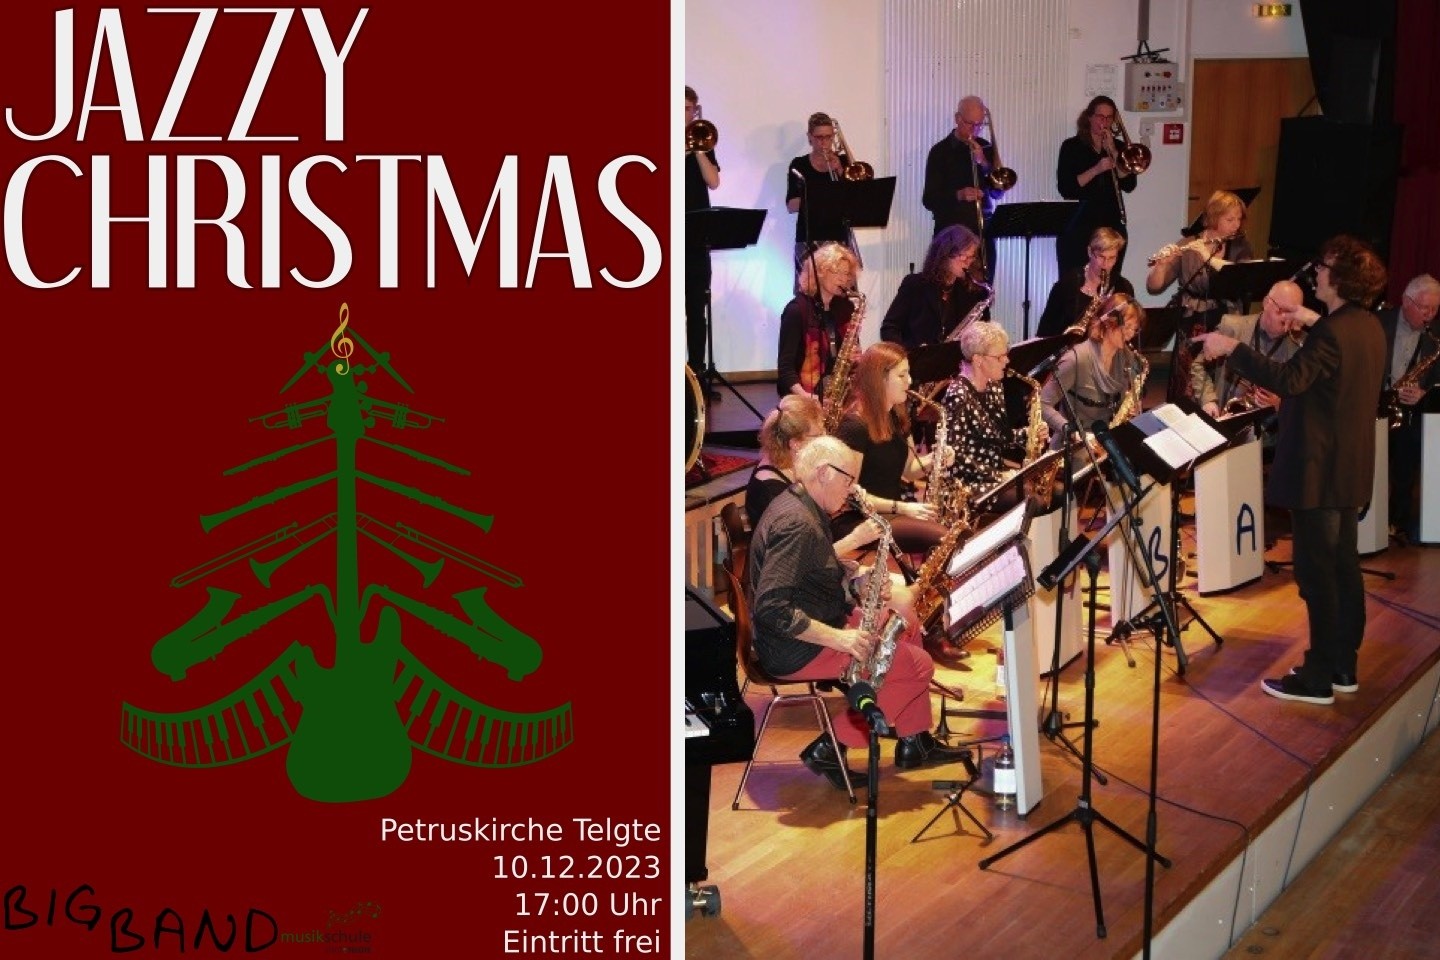 Jazzy Christmas.Telgte,Petruskirche,Big Band der Musikschule der Stadt Telgte,Big Band,Musikschule.Stadt Telgte,